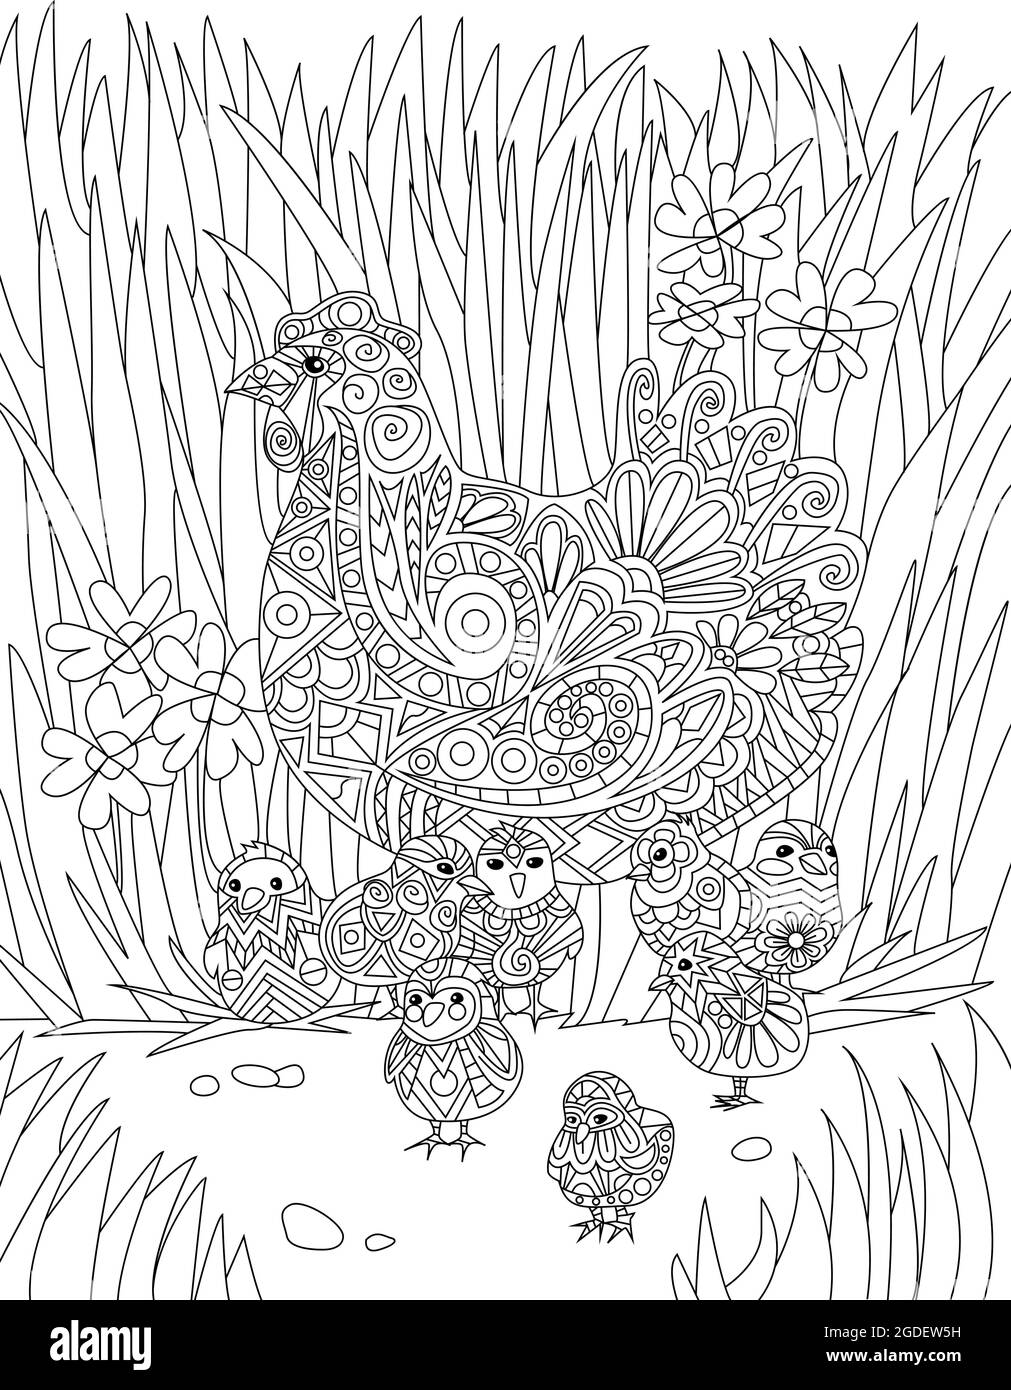 Chicken With Babies Resting In Tall Grass Colorless Line Drawings ...